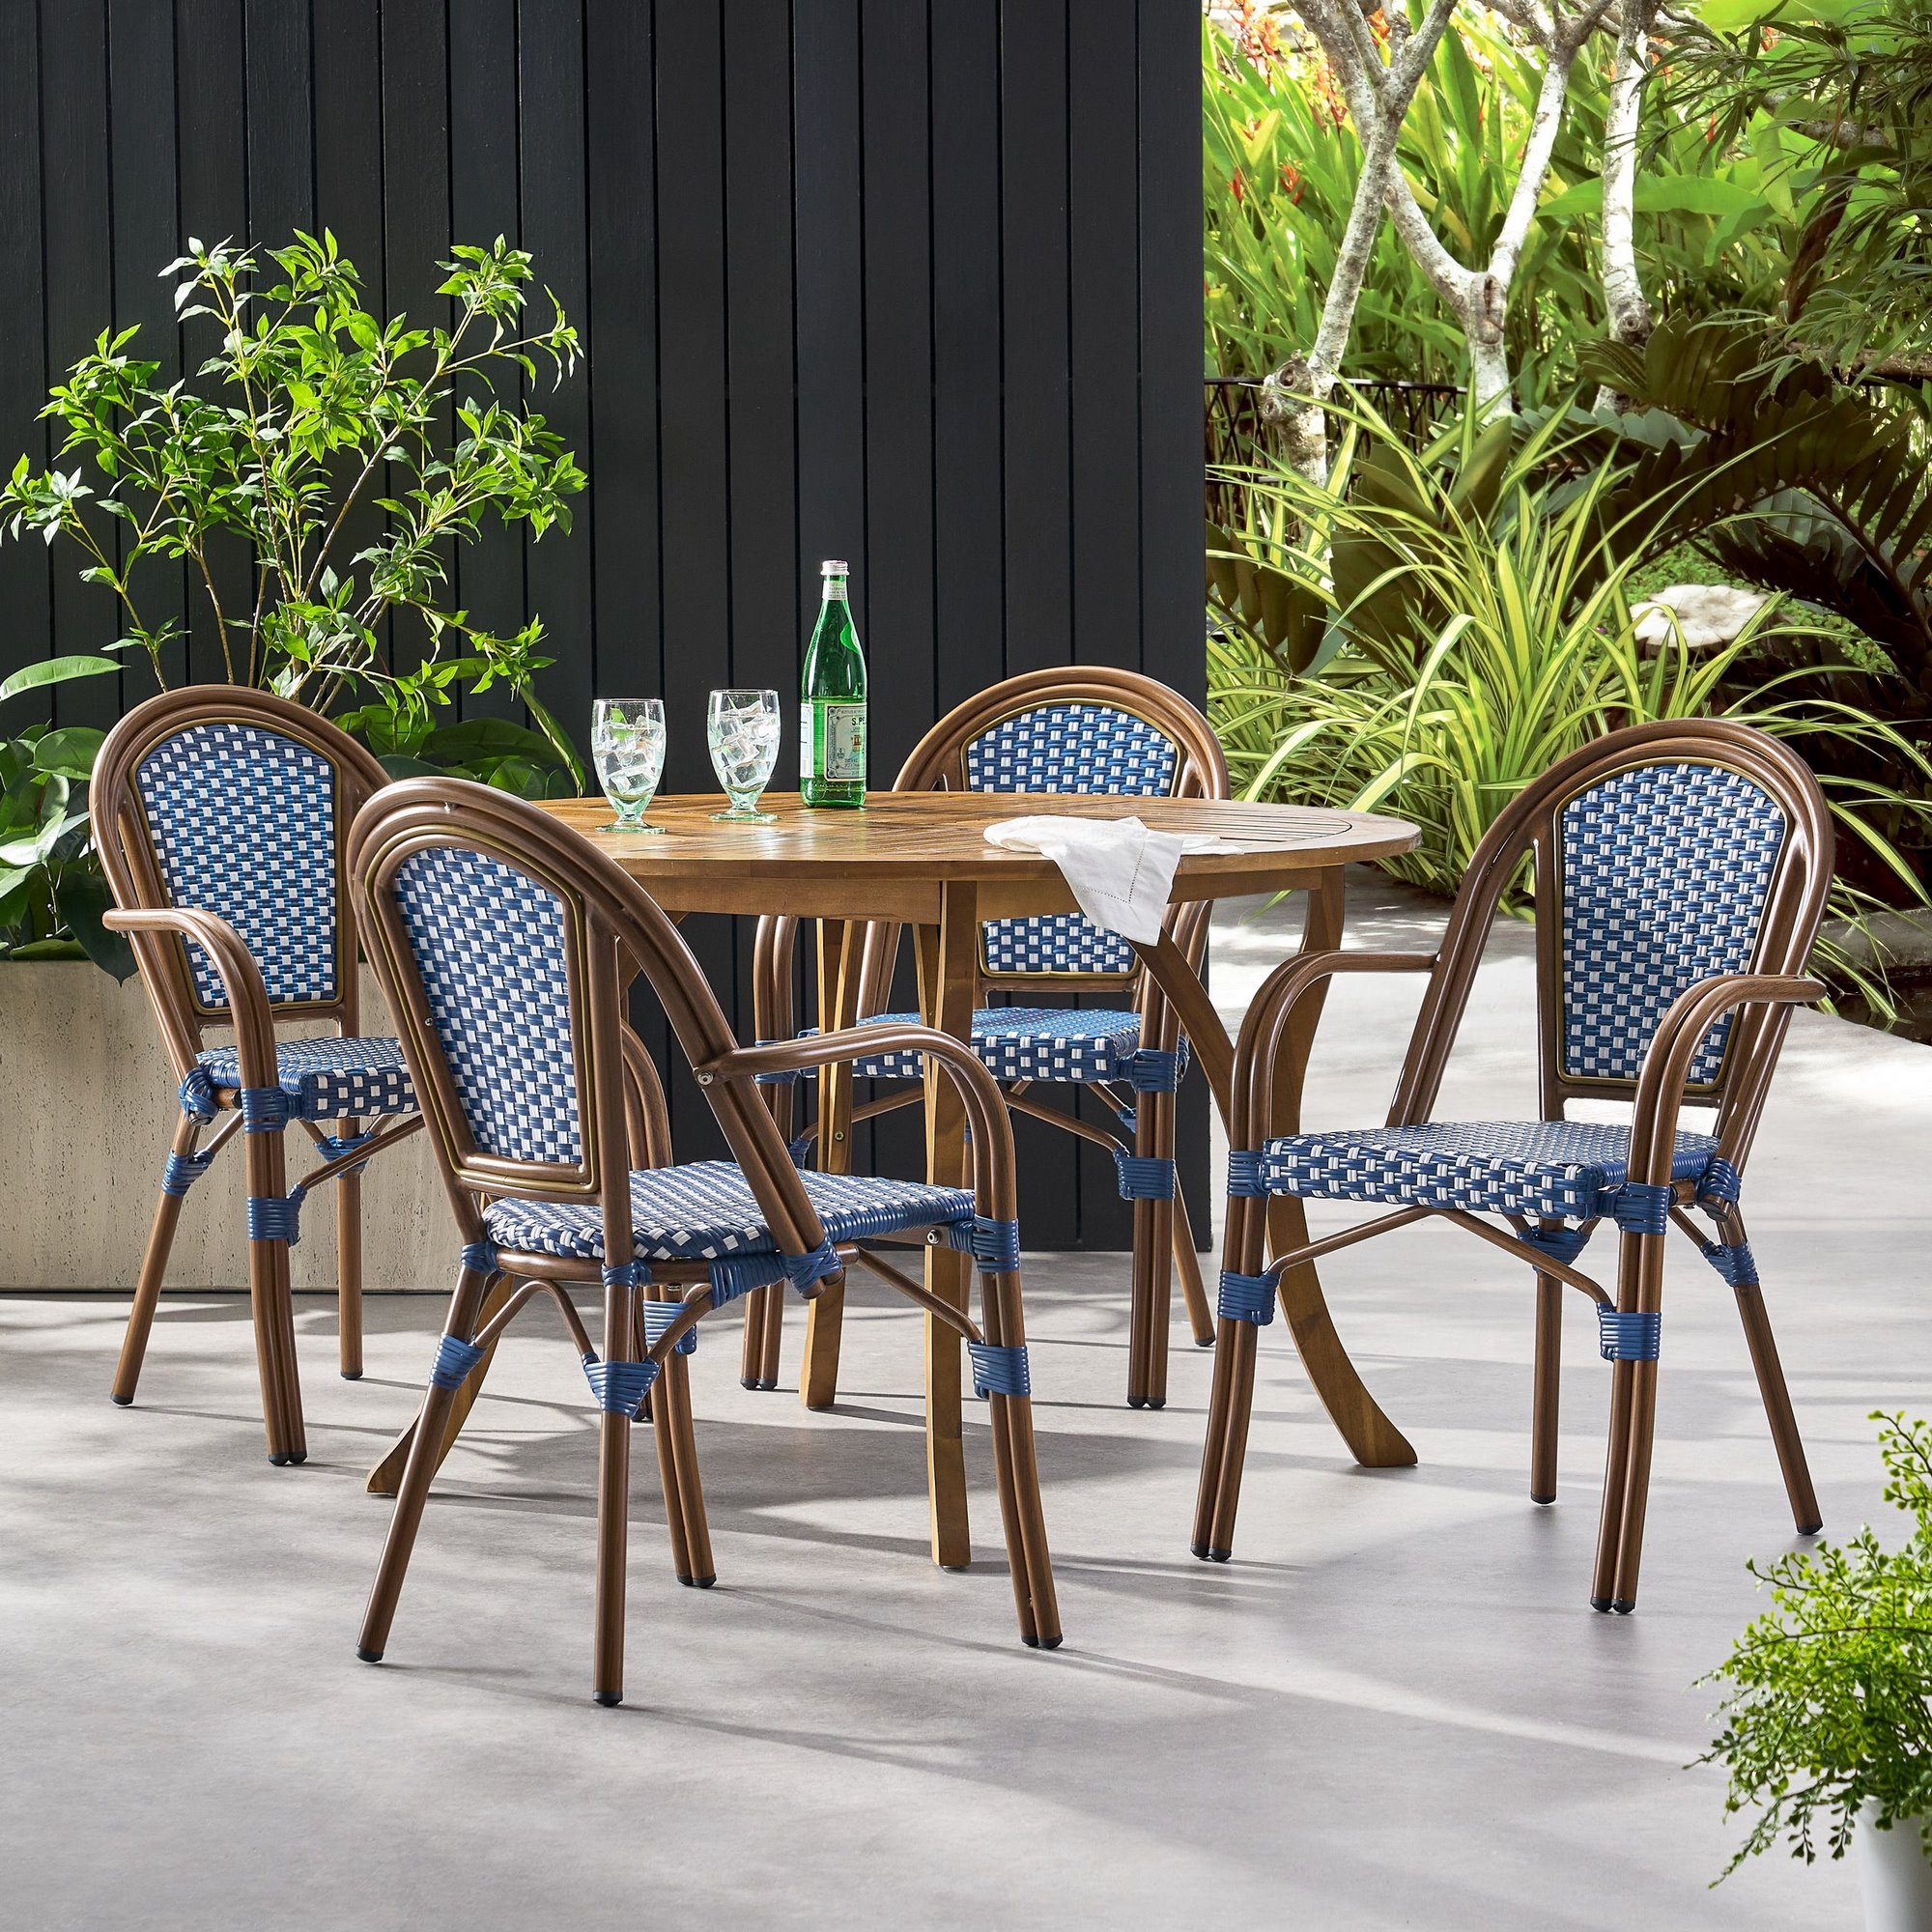 Brianna Outdoor French Bistro Chairs (Set of 4), Navy Blue, White 